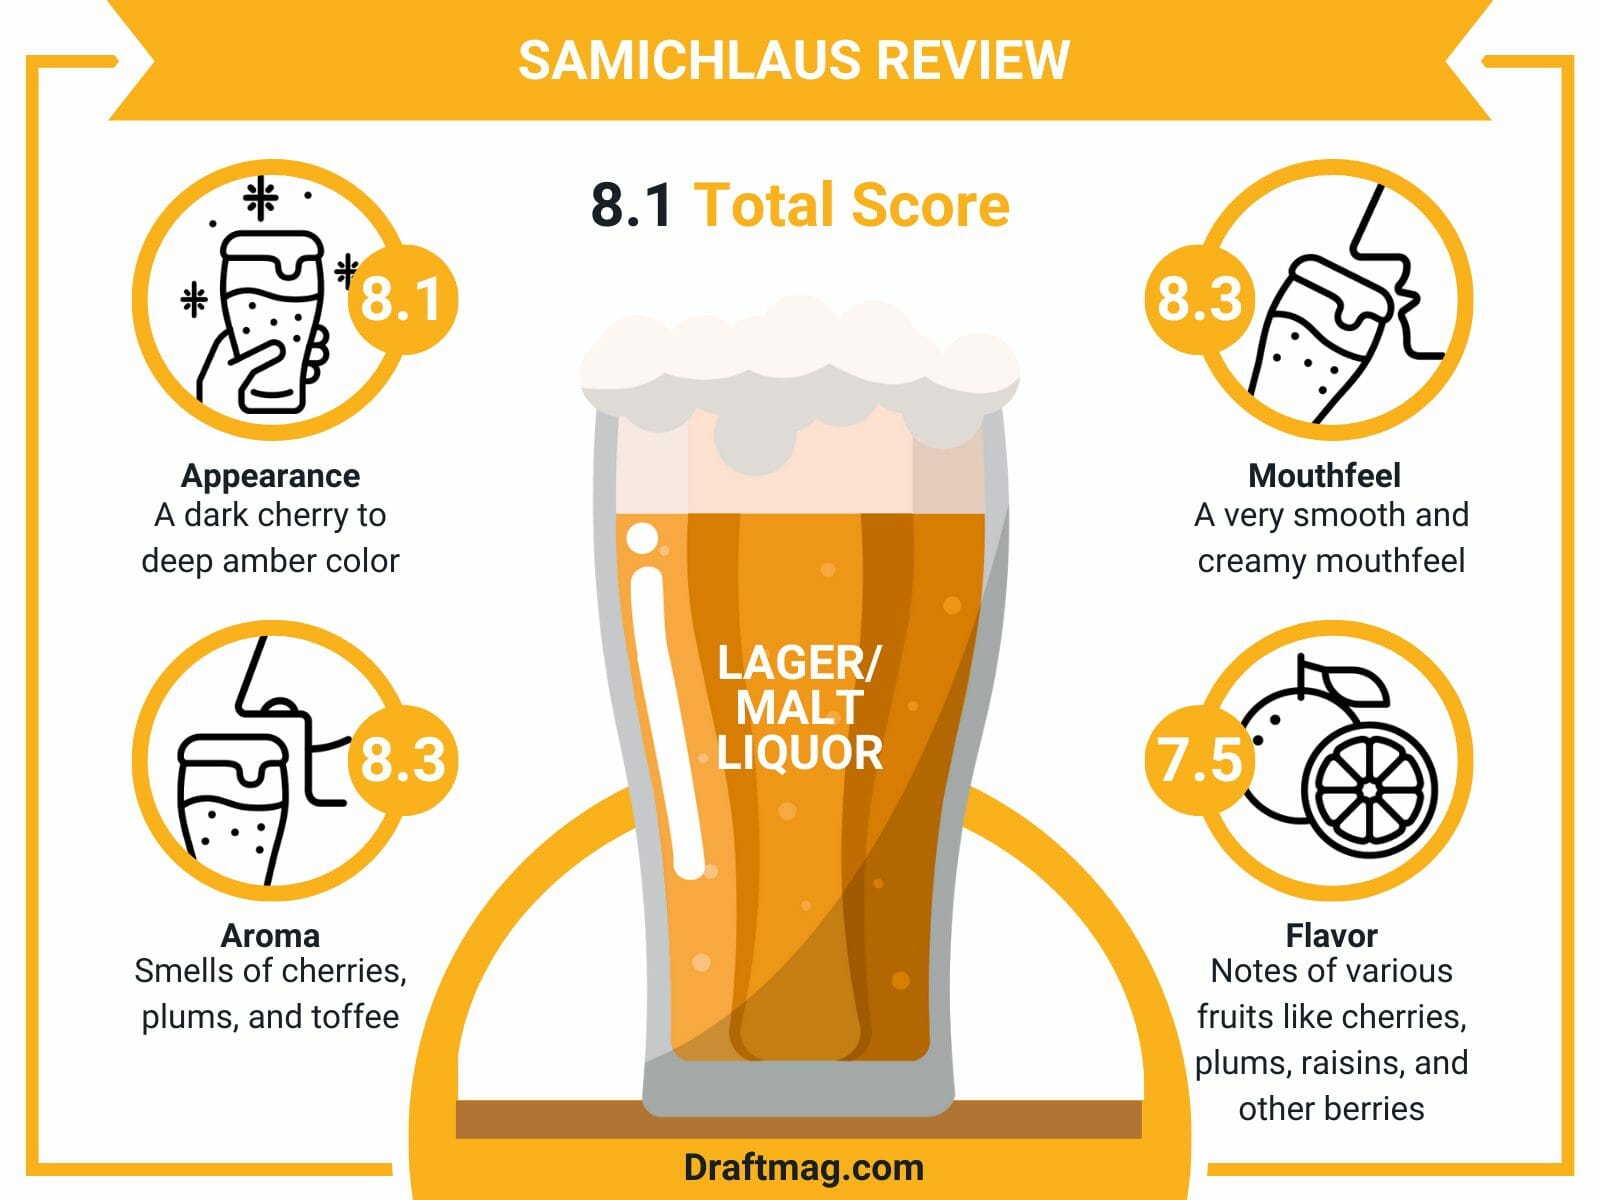 Samichlaus Review Infographic